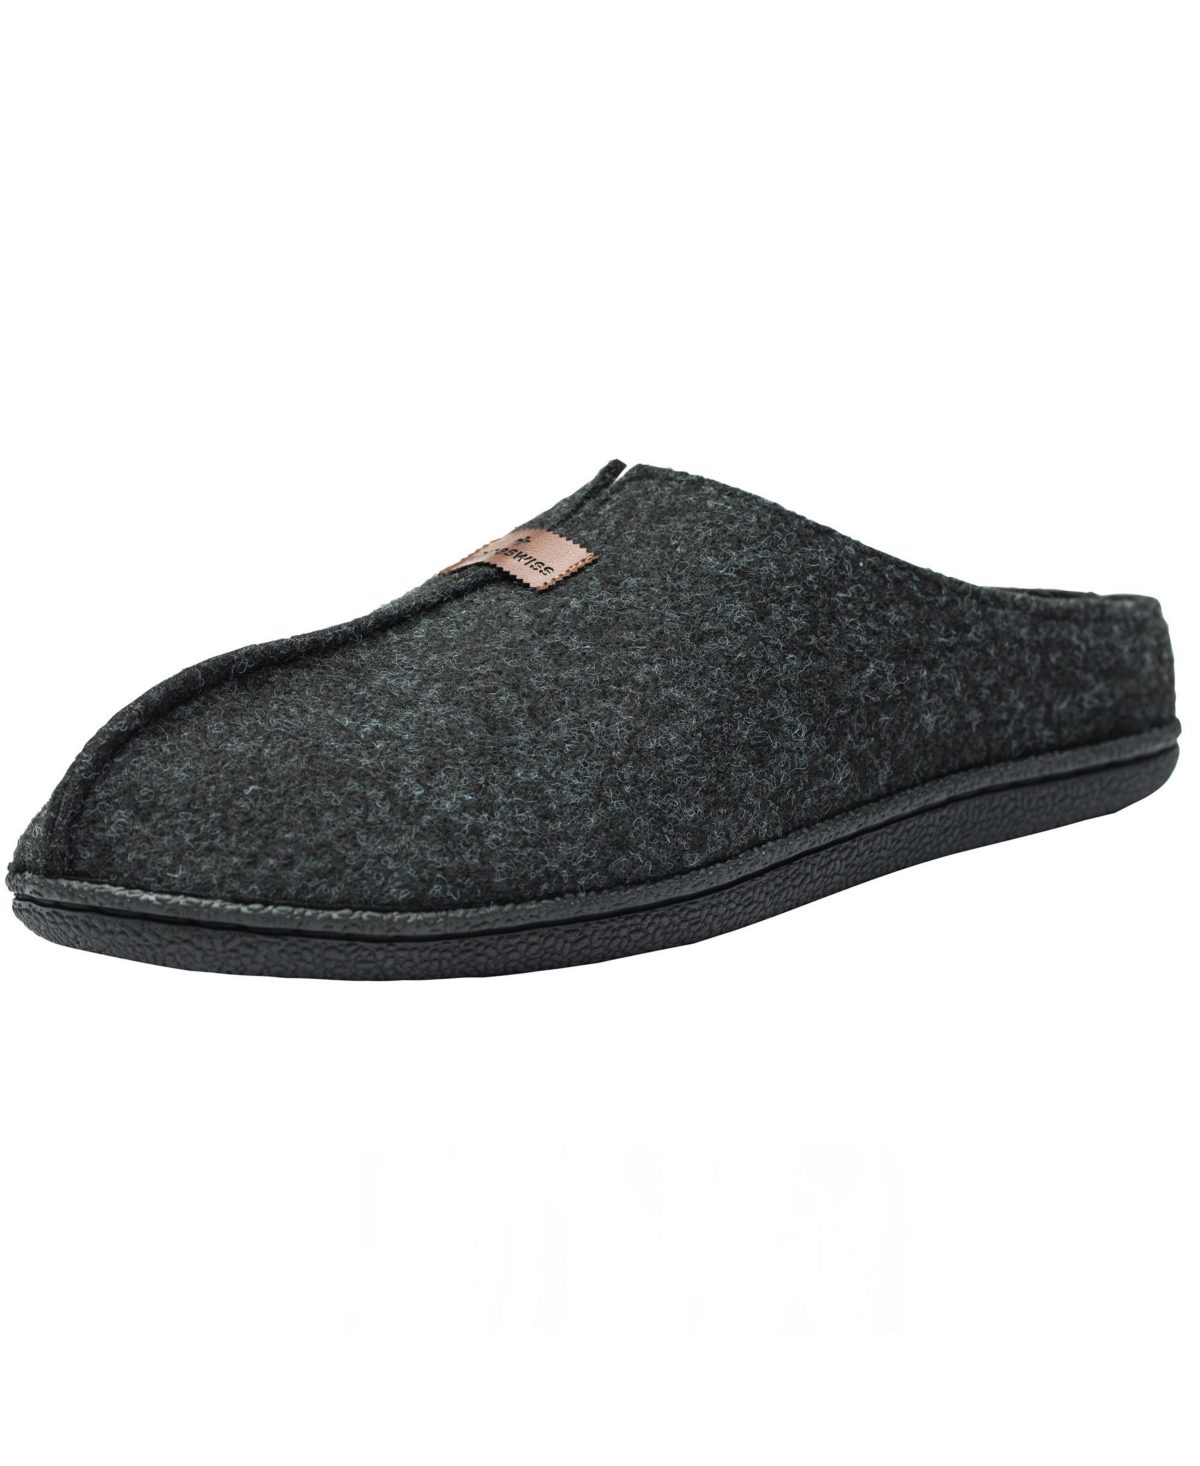 Mens Felt Faux Wool Clog Slippers Comfortable Cushion House Shoes - Charcoal